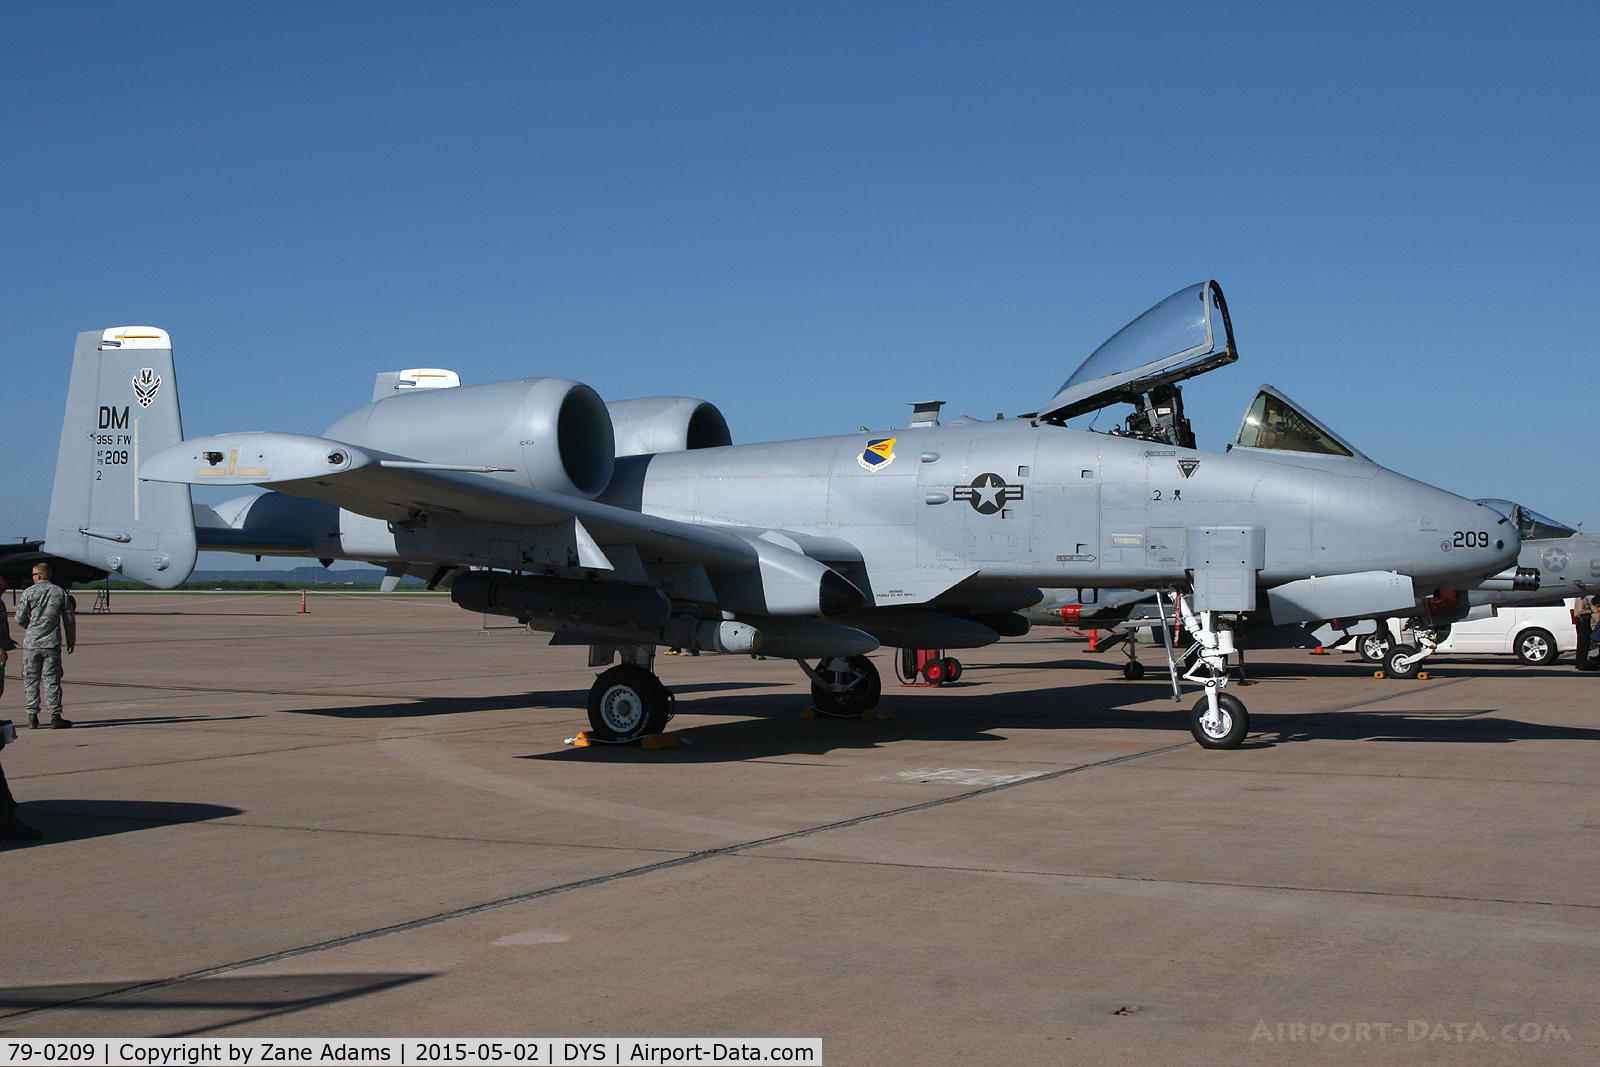 79-0209, 1979 Fairchild Republic A-10C Thunderbolt II C/N A10-0473, At the 2014 Big Country Airshow - Dyess AFB, TX